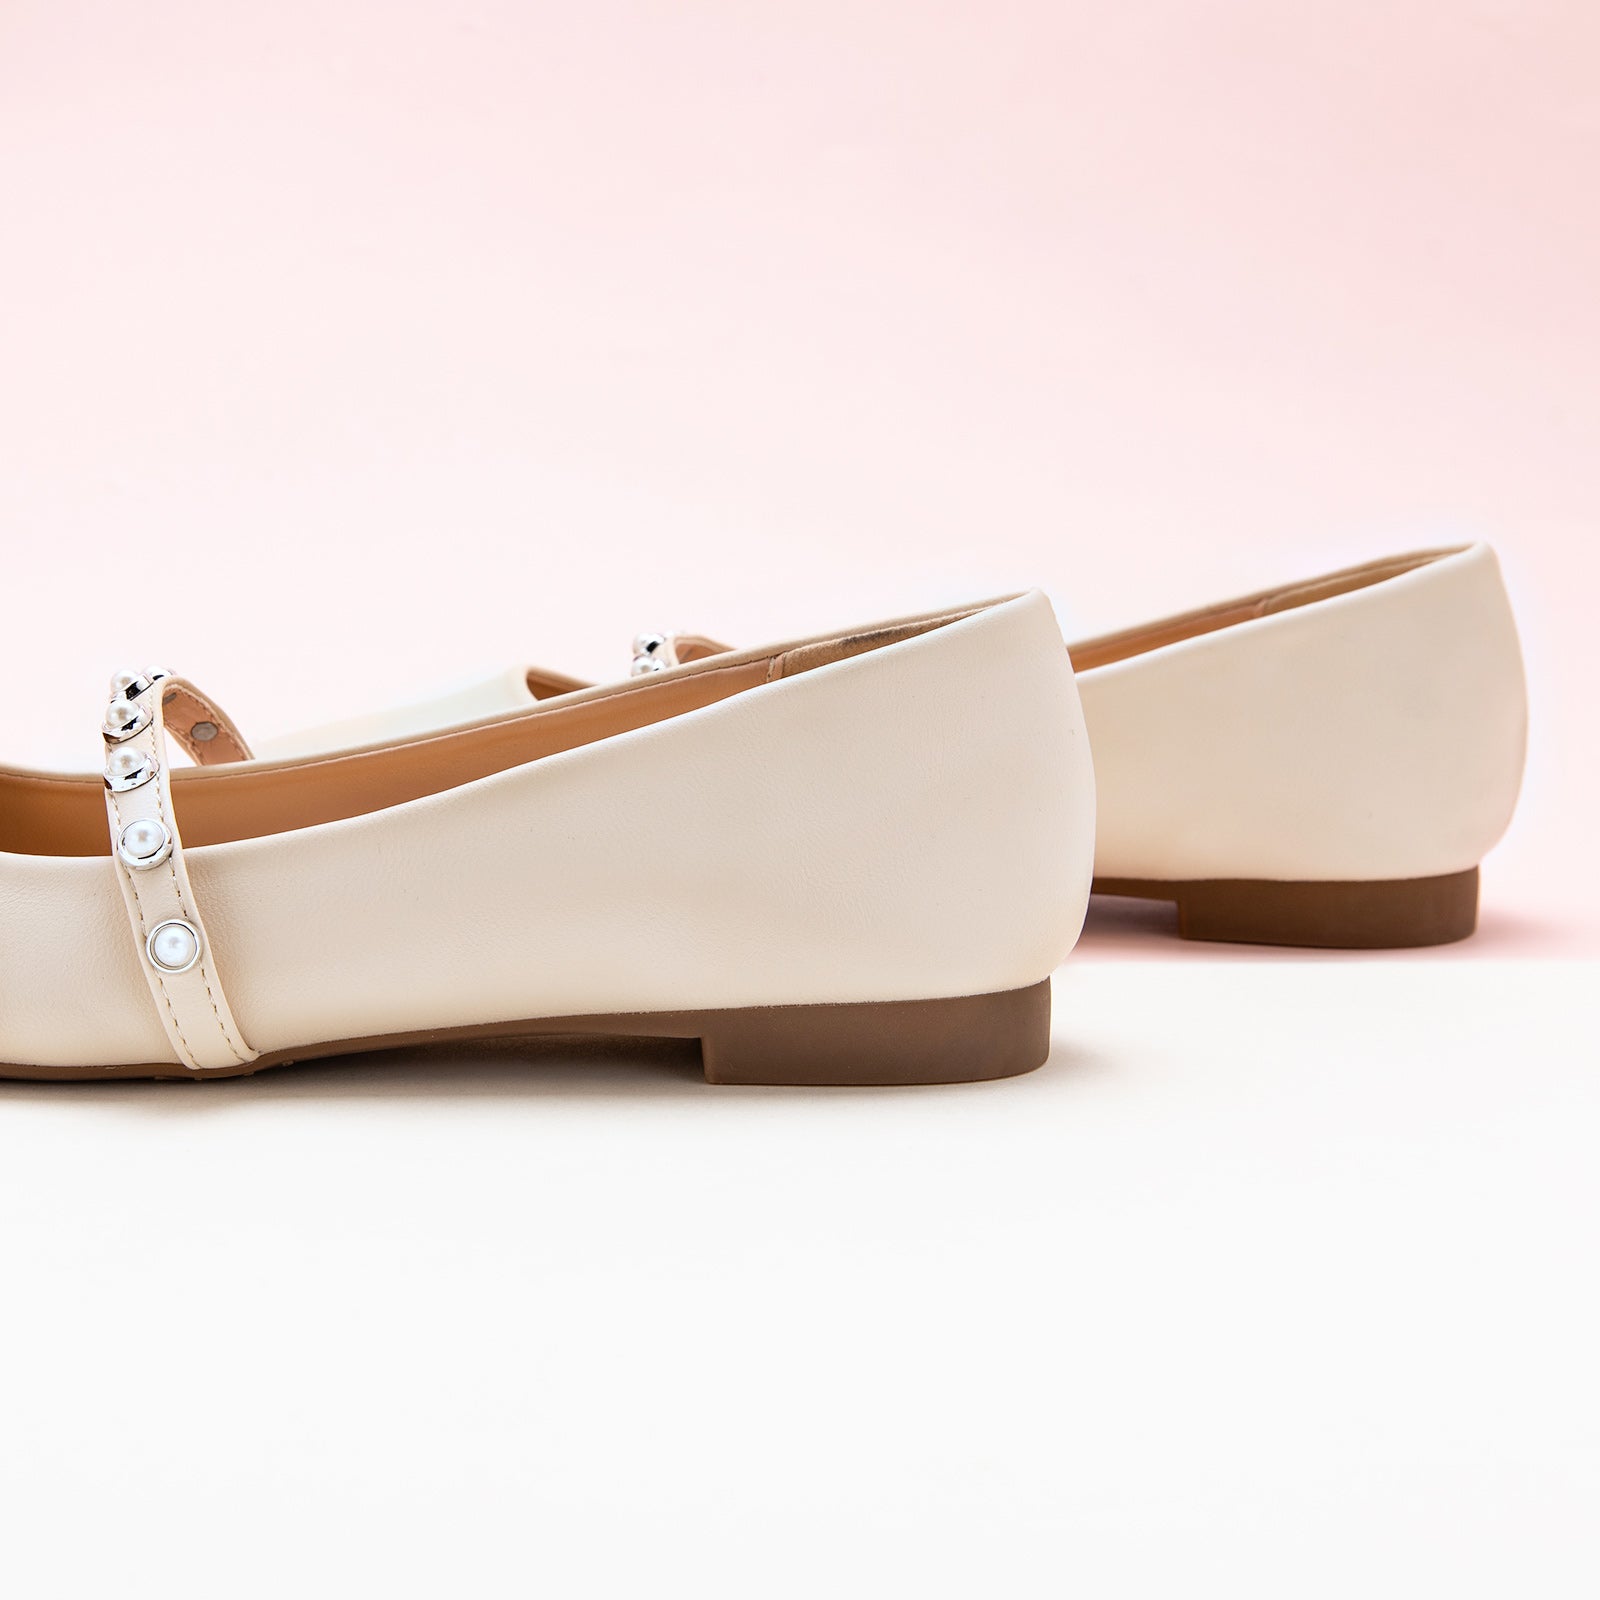 White Mary Jane Flats with a single stripe and pearl, a chic and minimalist option for elevating your everyday style.